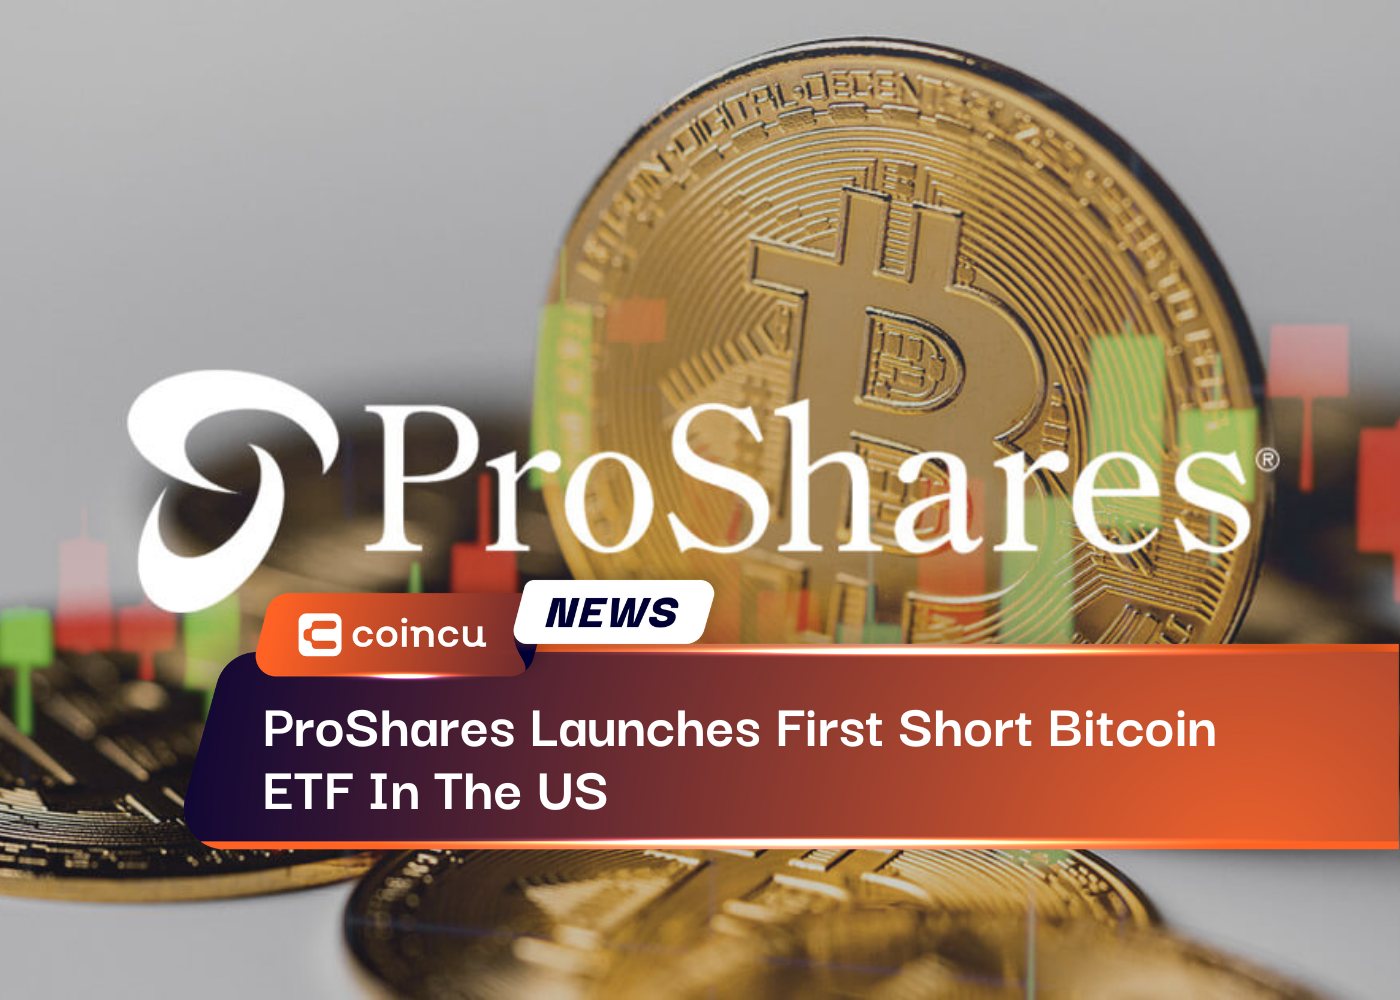 ProShares Launches First Short Bitcoin ETF In The US